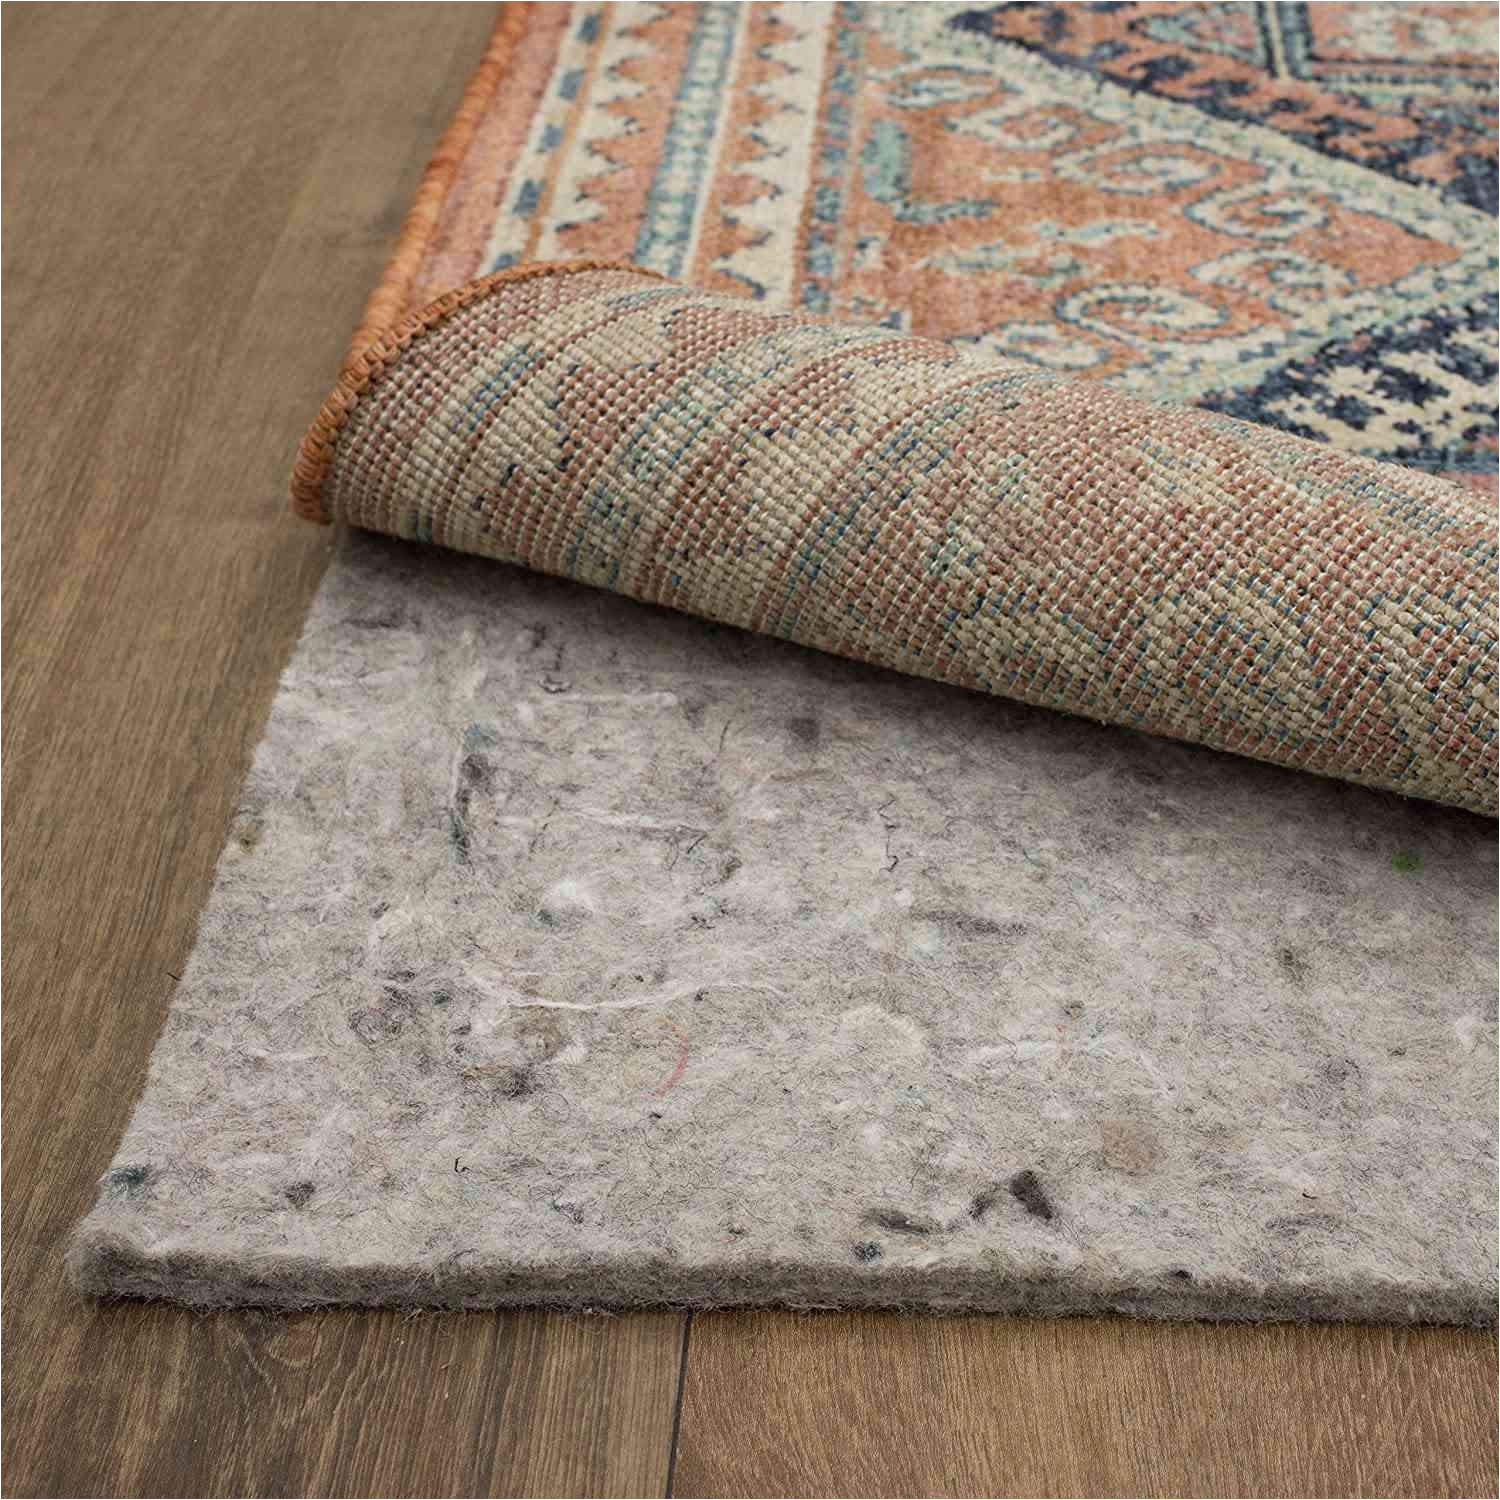 Best Rug Pads for area Rugs the 8 Best Rug Pads Of 2021